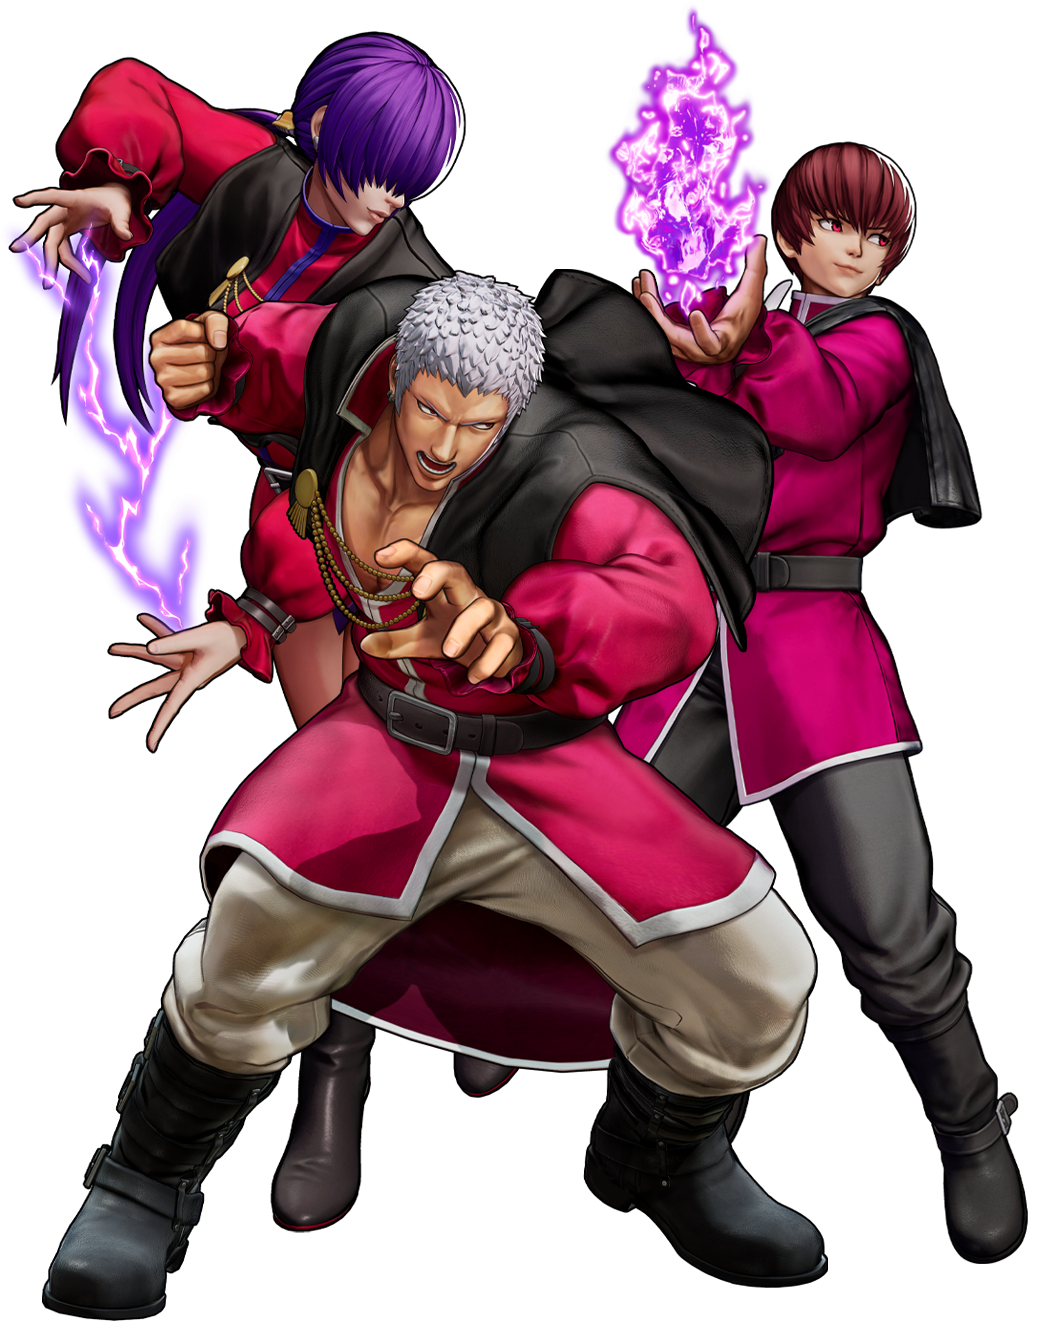 Is it worth the money? — The Awakened Orochi trio in King of Fighters 15